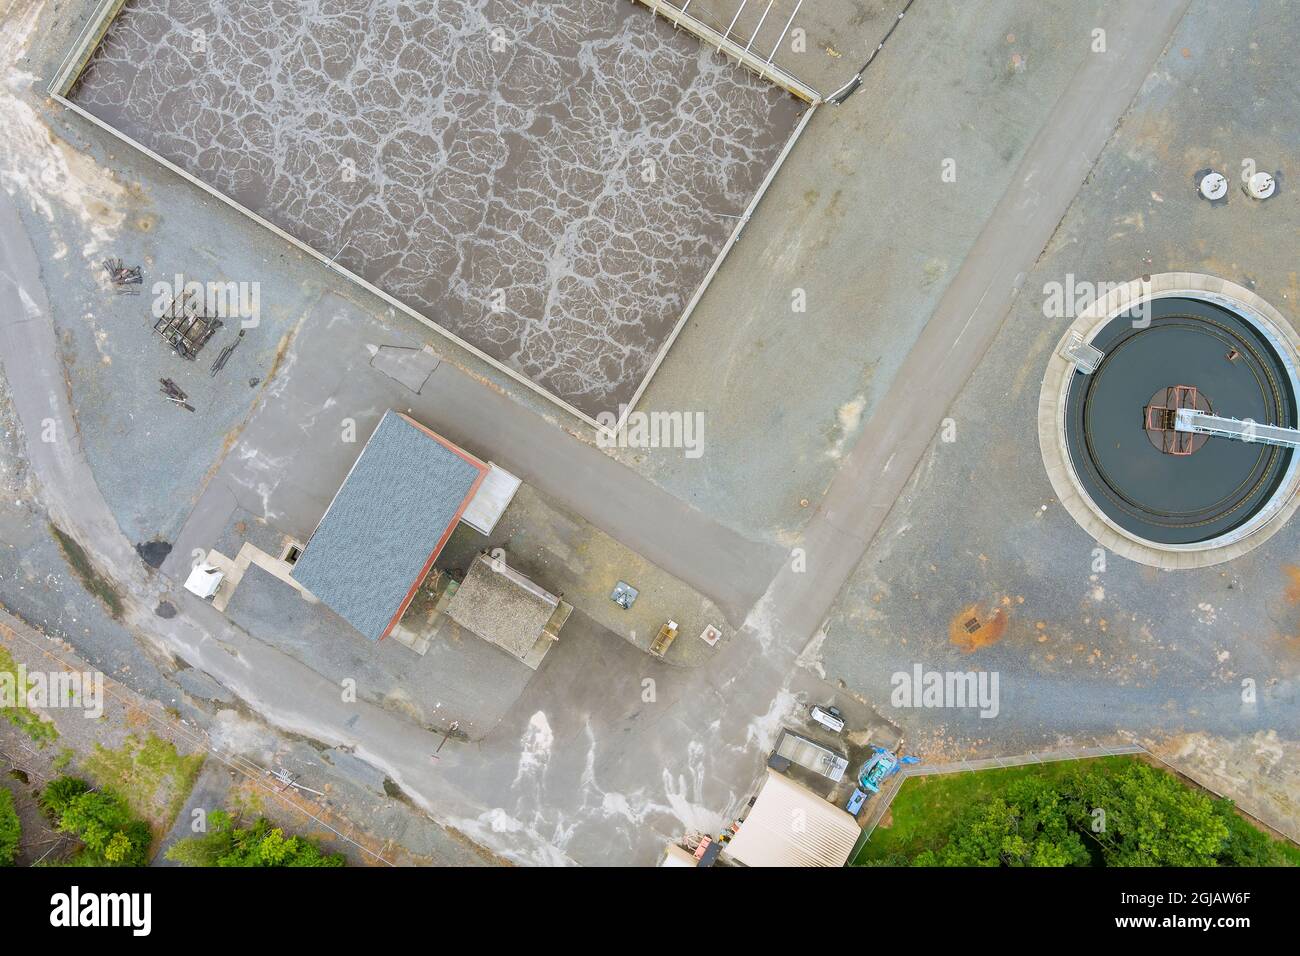 Aerial view of a wastewater purification installation sewage treatment plant Stock Photo